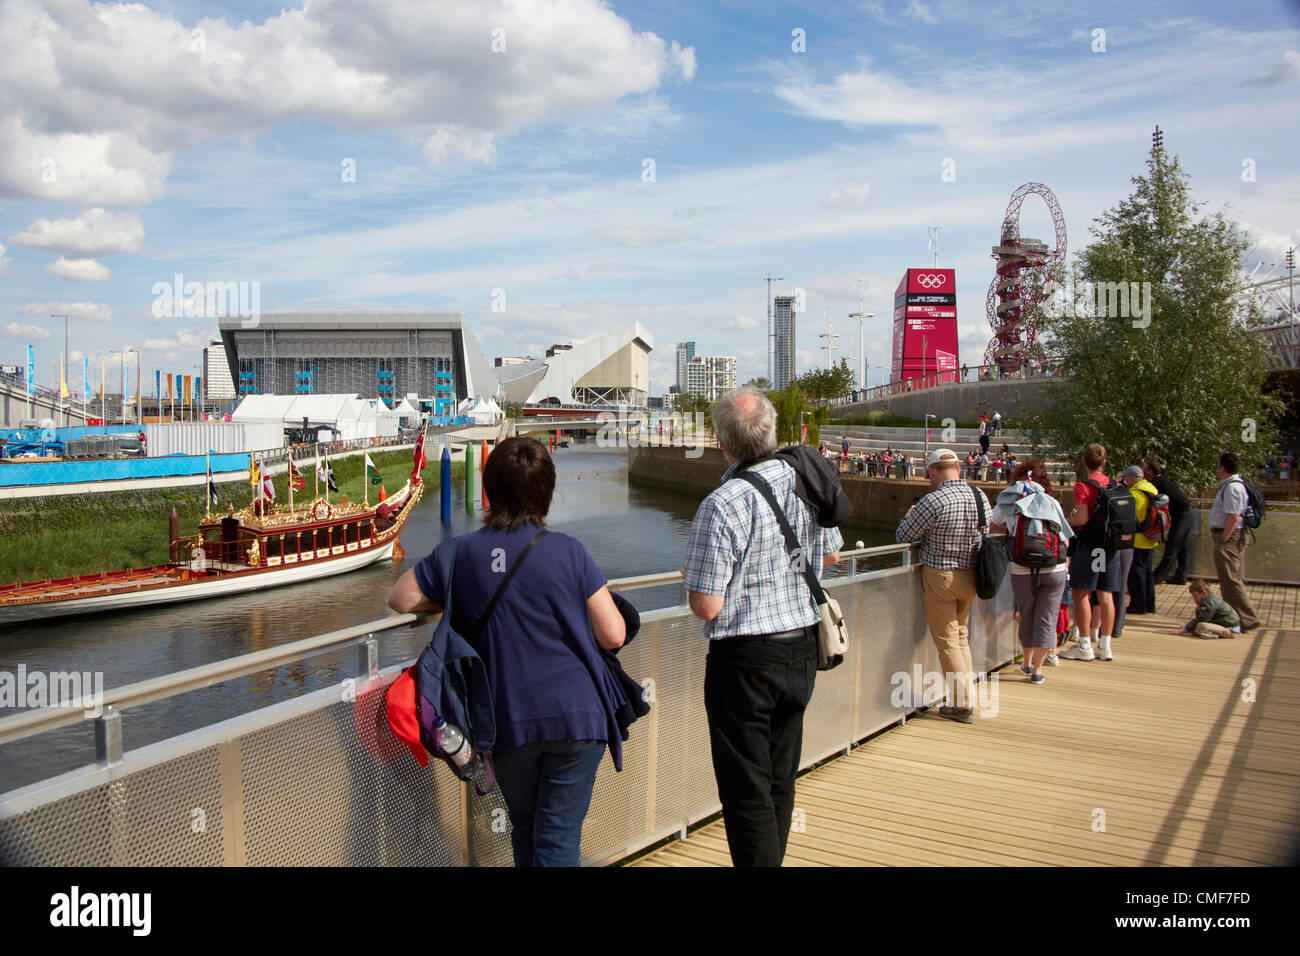 People by River Lea with Royal Barge, Arenas and Orbit at Olympic Park, London 2012 Olympic Games site, Stratford London E20 UK, Stock Photo